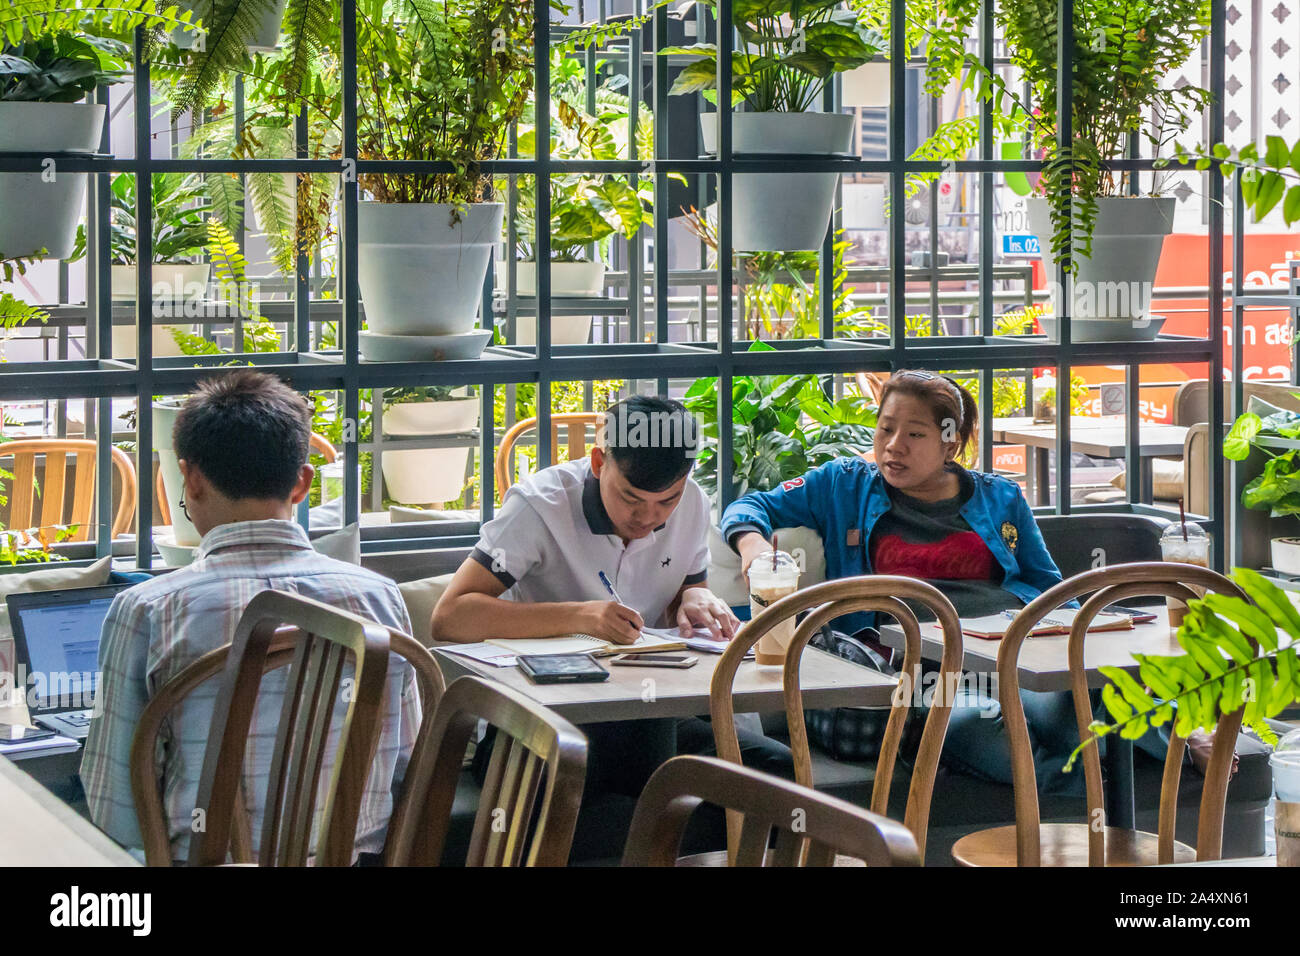 Bangkok, Thailand - January 30th 2019: Students studying in a coffee shop. There are many coffee shops in the city. Stock Photo